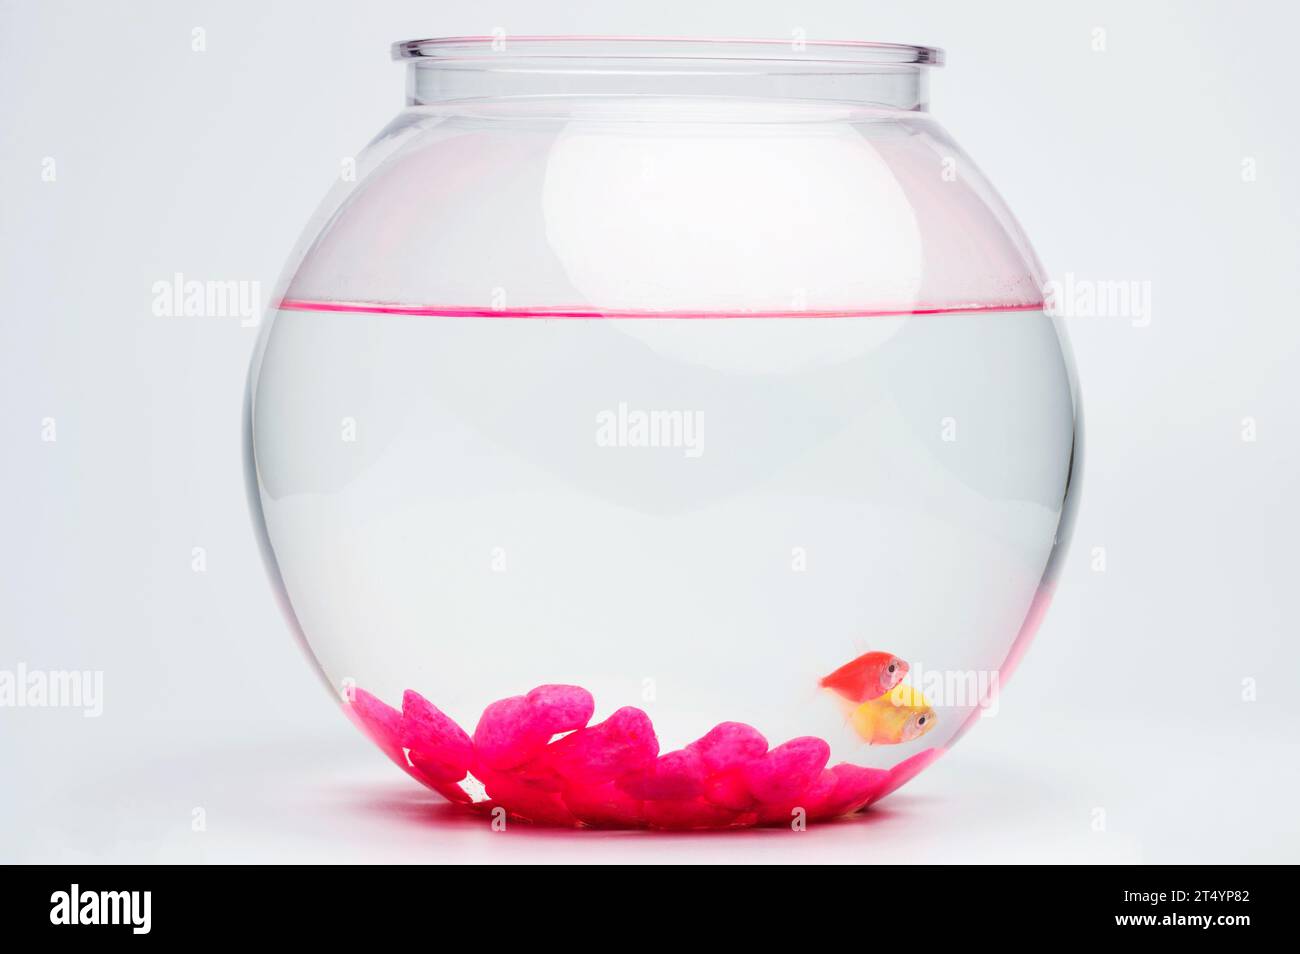 Clean aquarium bowl with fishes and pink rocks side view isolated on white studio background Stock Photo